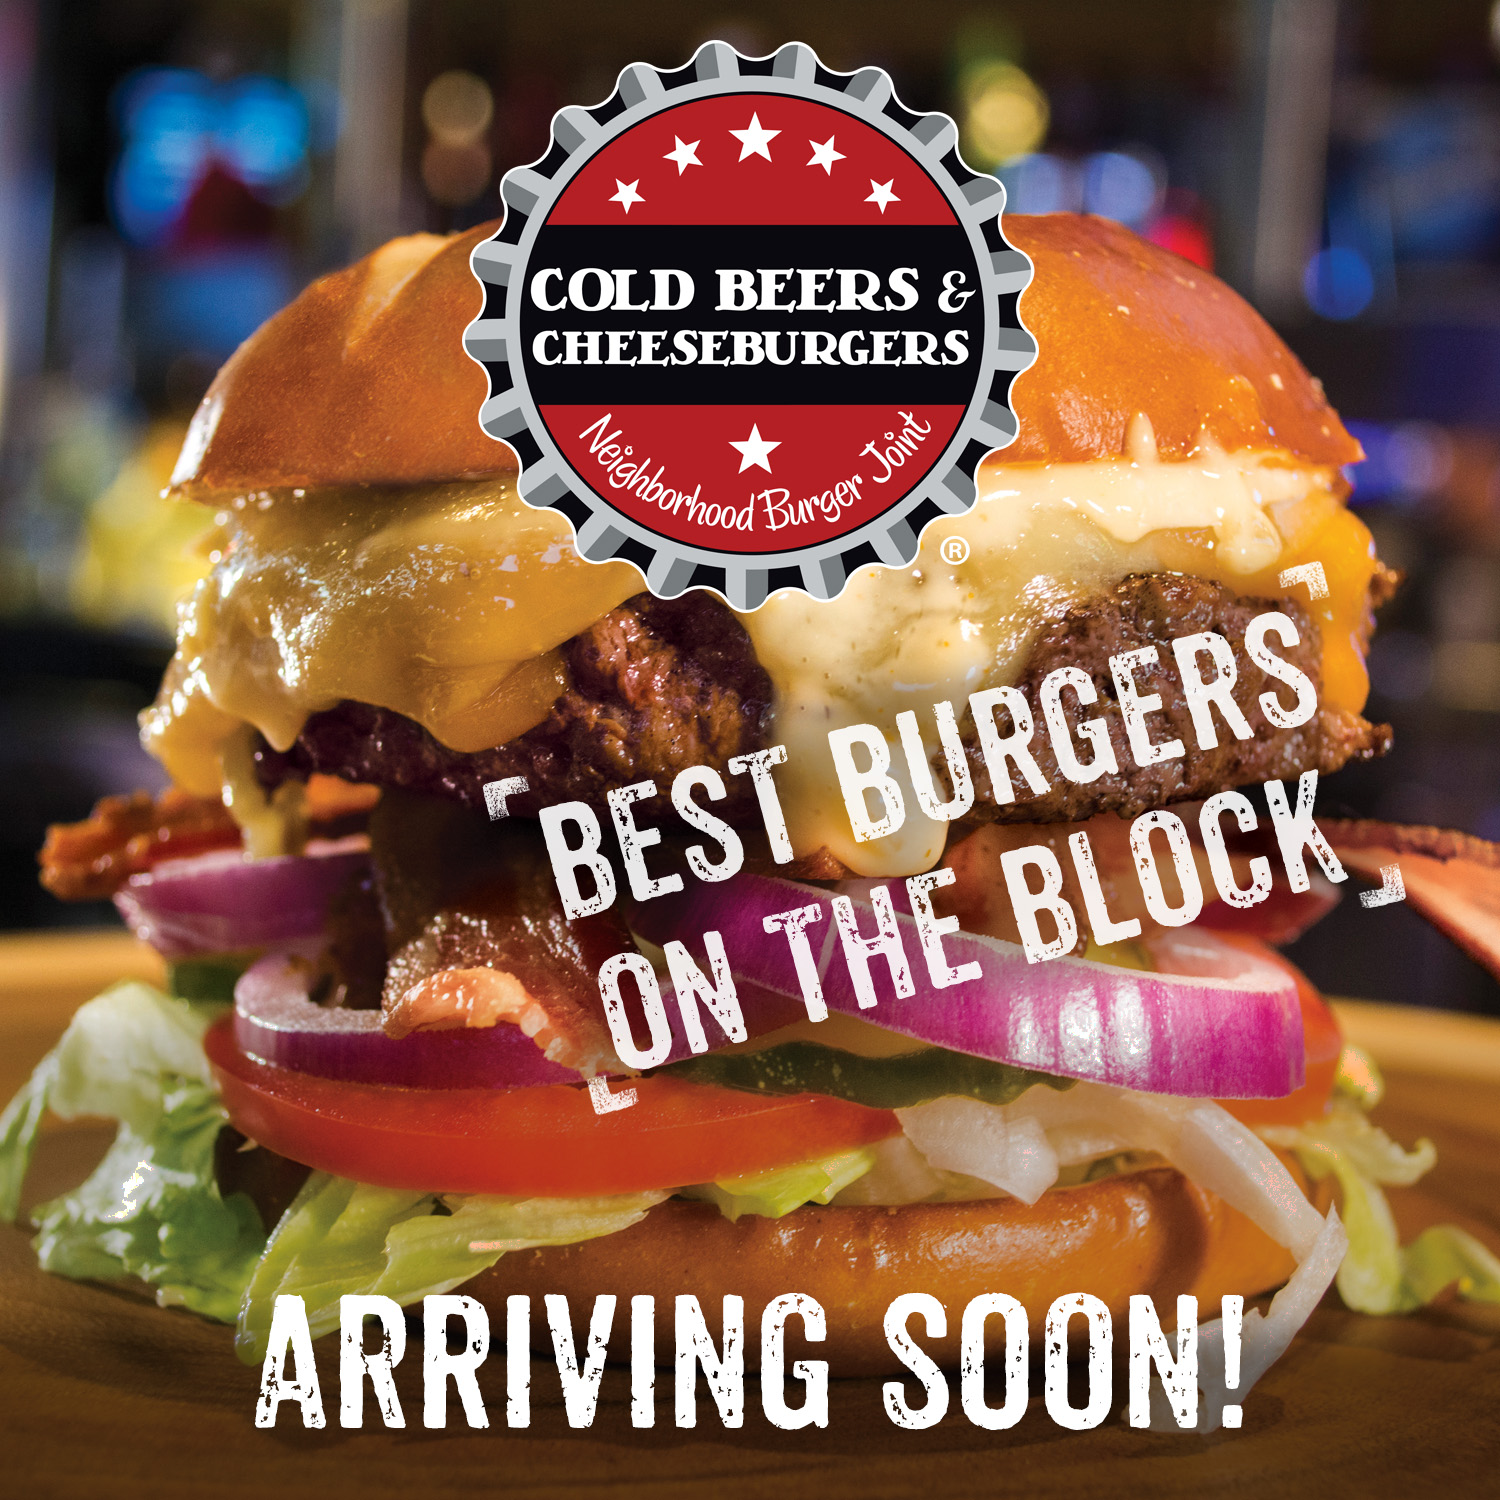 Cold Beers & Cheeseburgers coming soon graphic